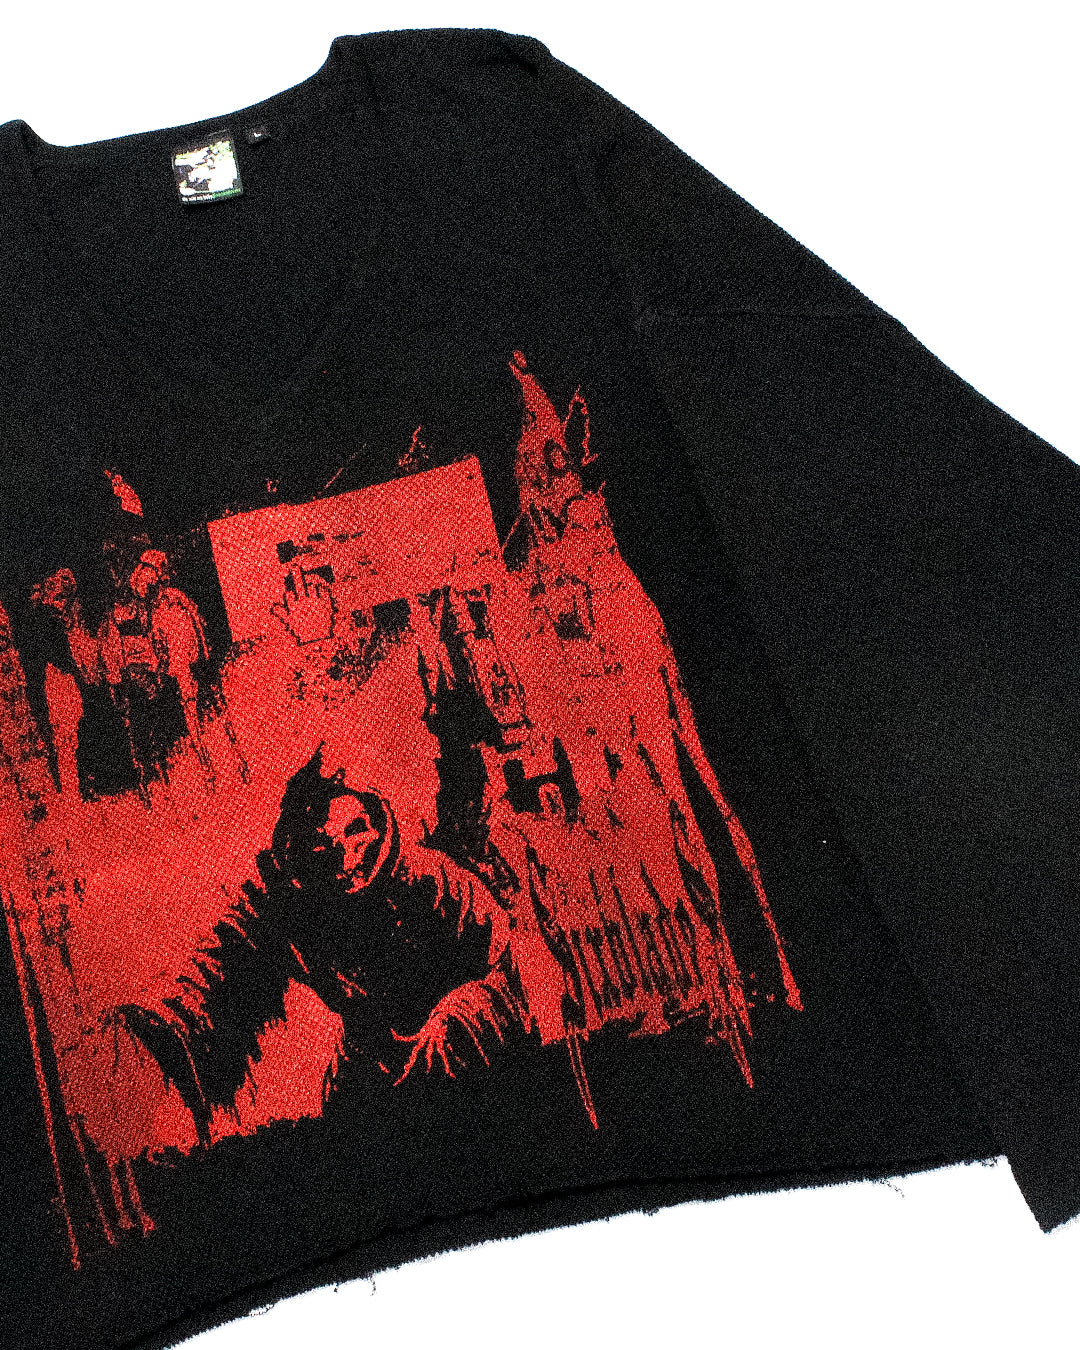 "SILK ROAD SWITCHBLADES" Heavyweight Cropped Knit (L)